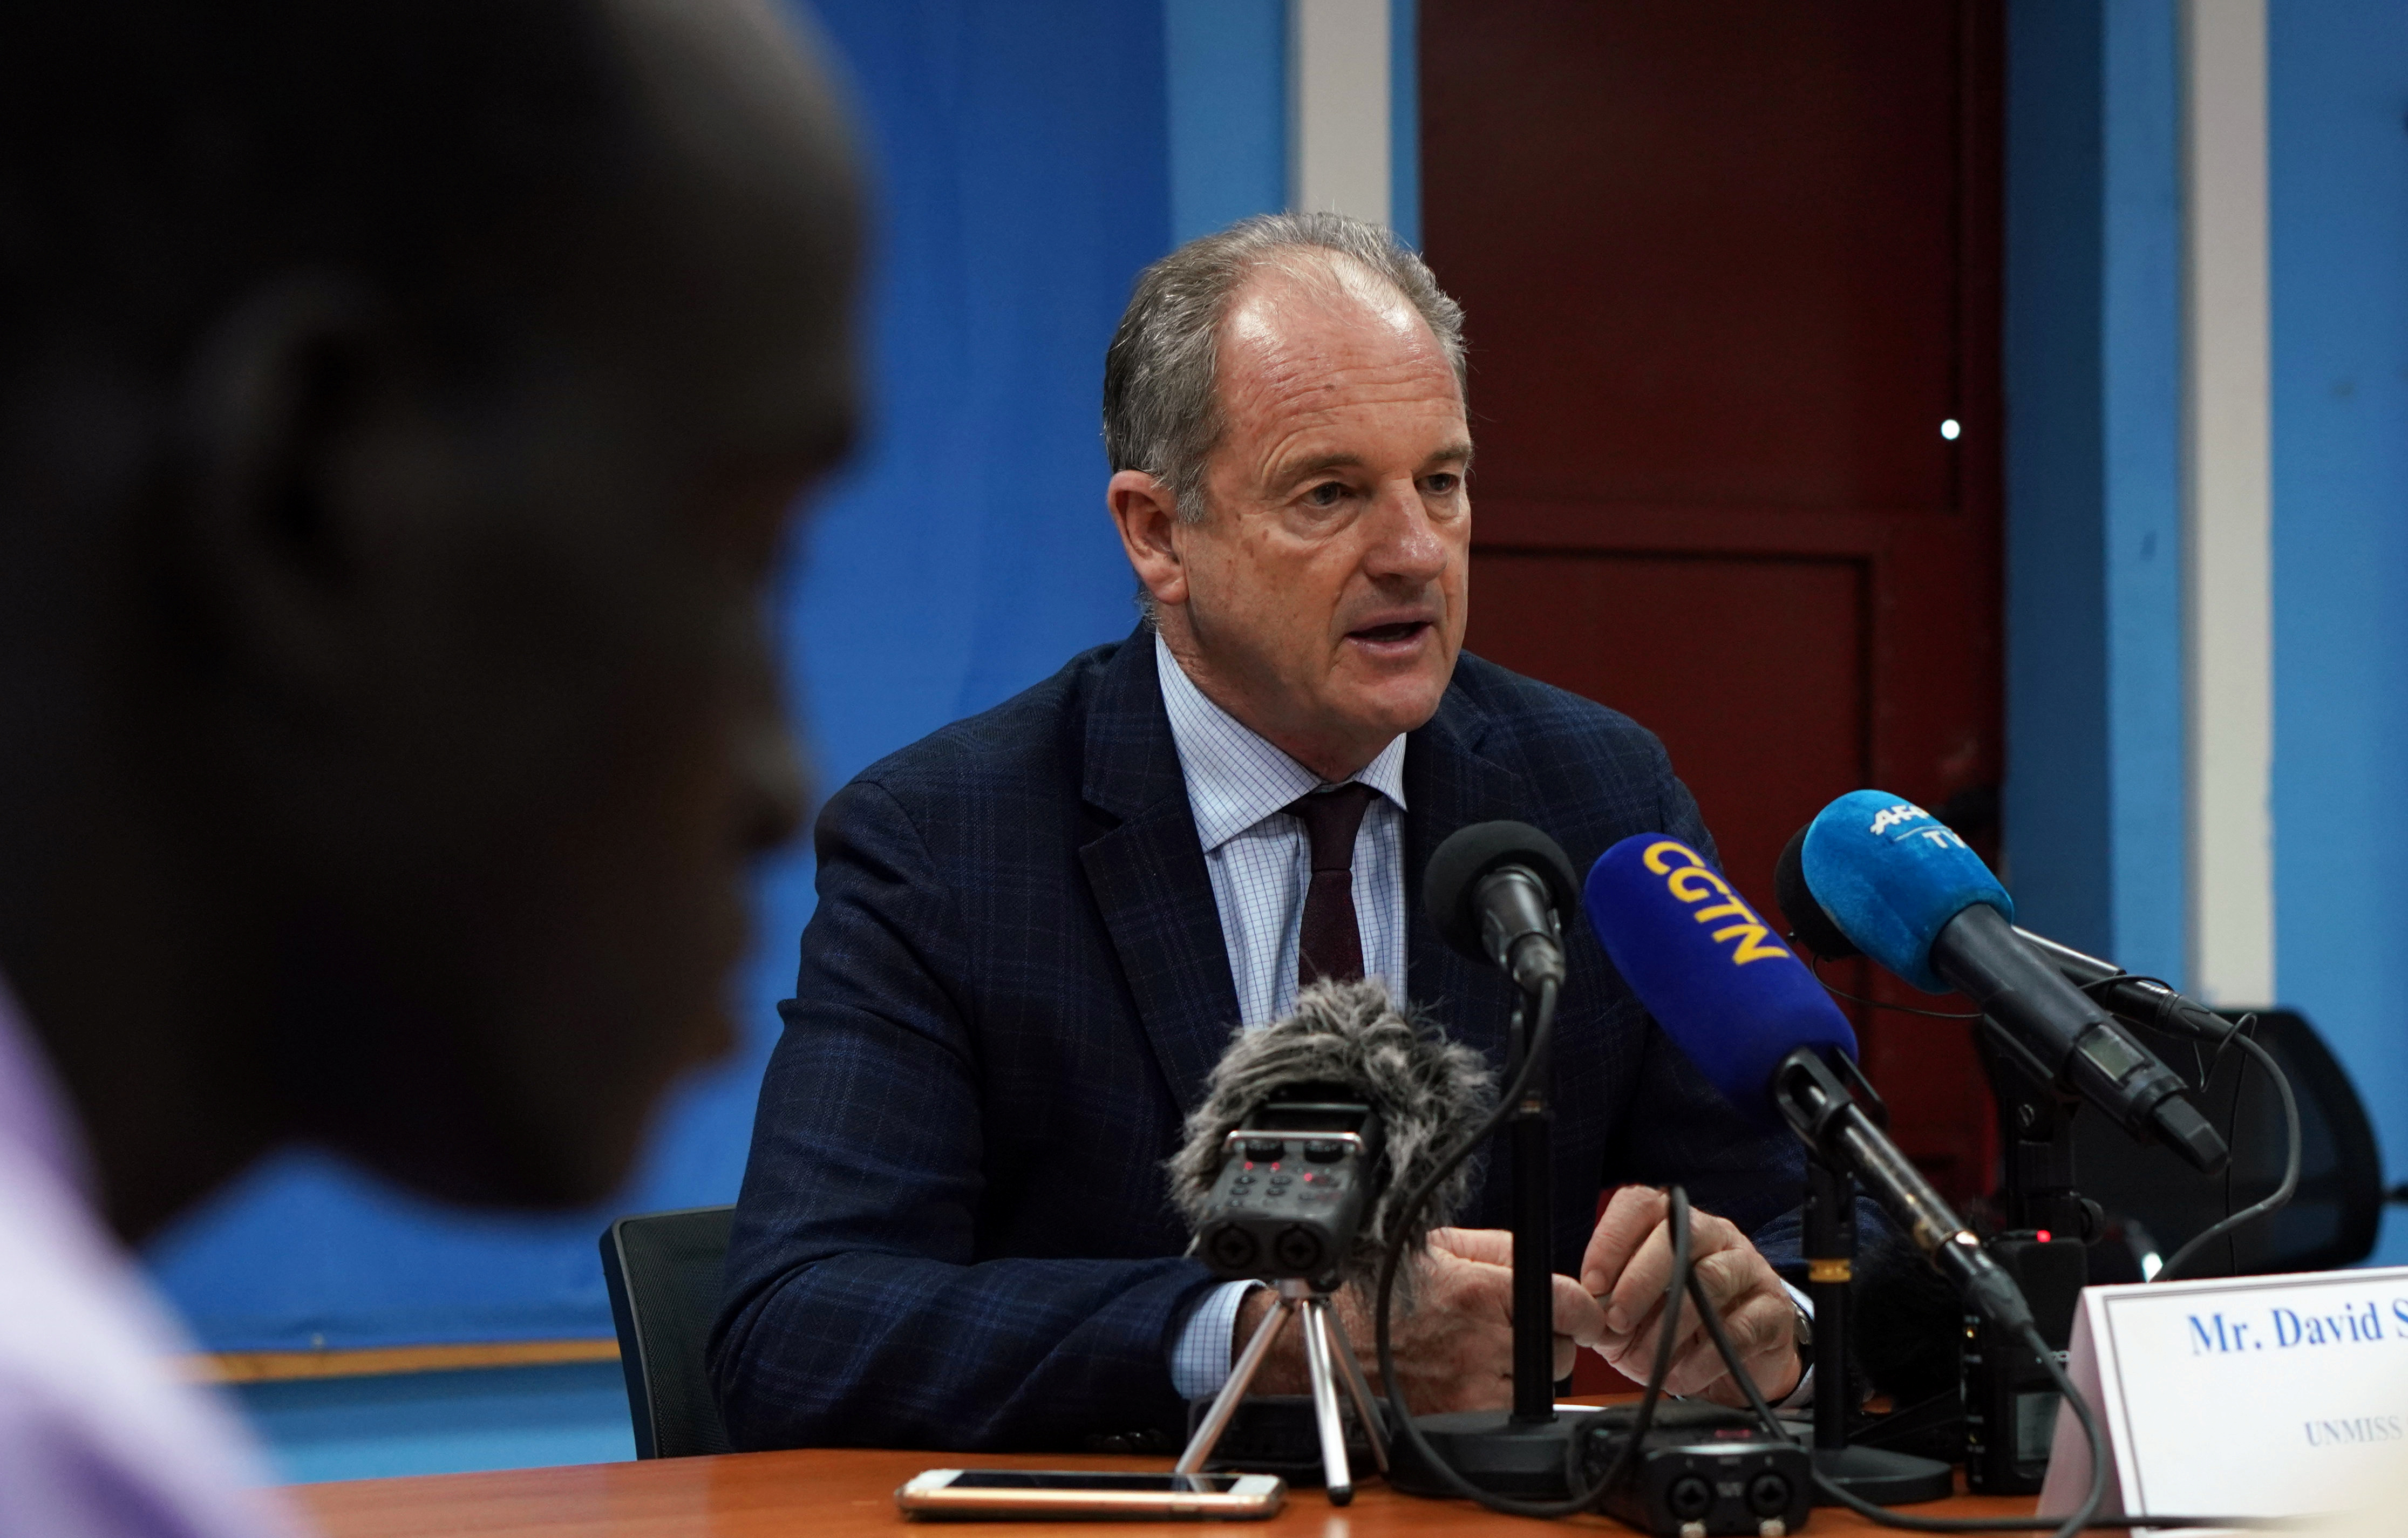 David Shearer, the united nation's head of mission in South Sudan speaks during a news conference in Juba